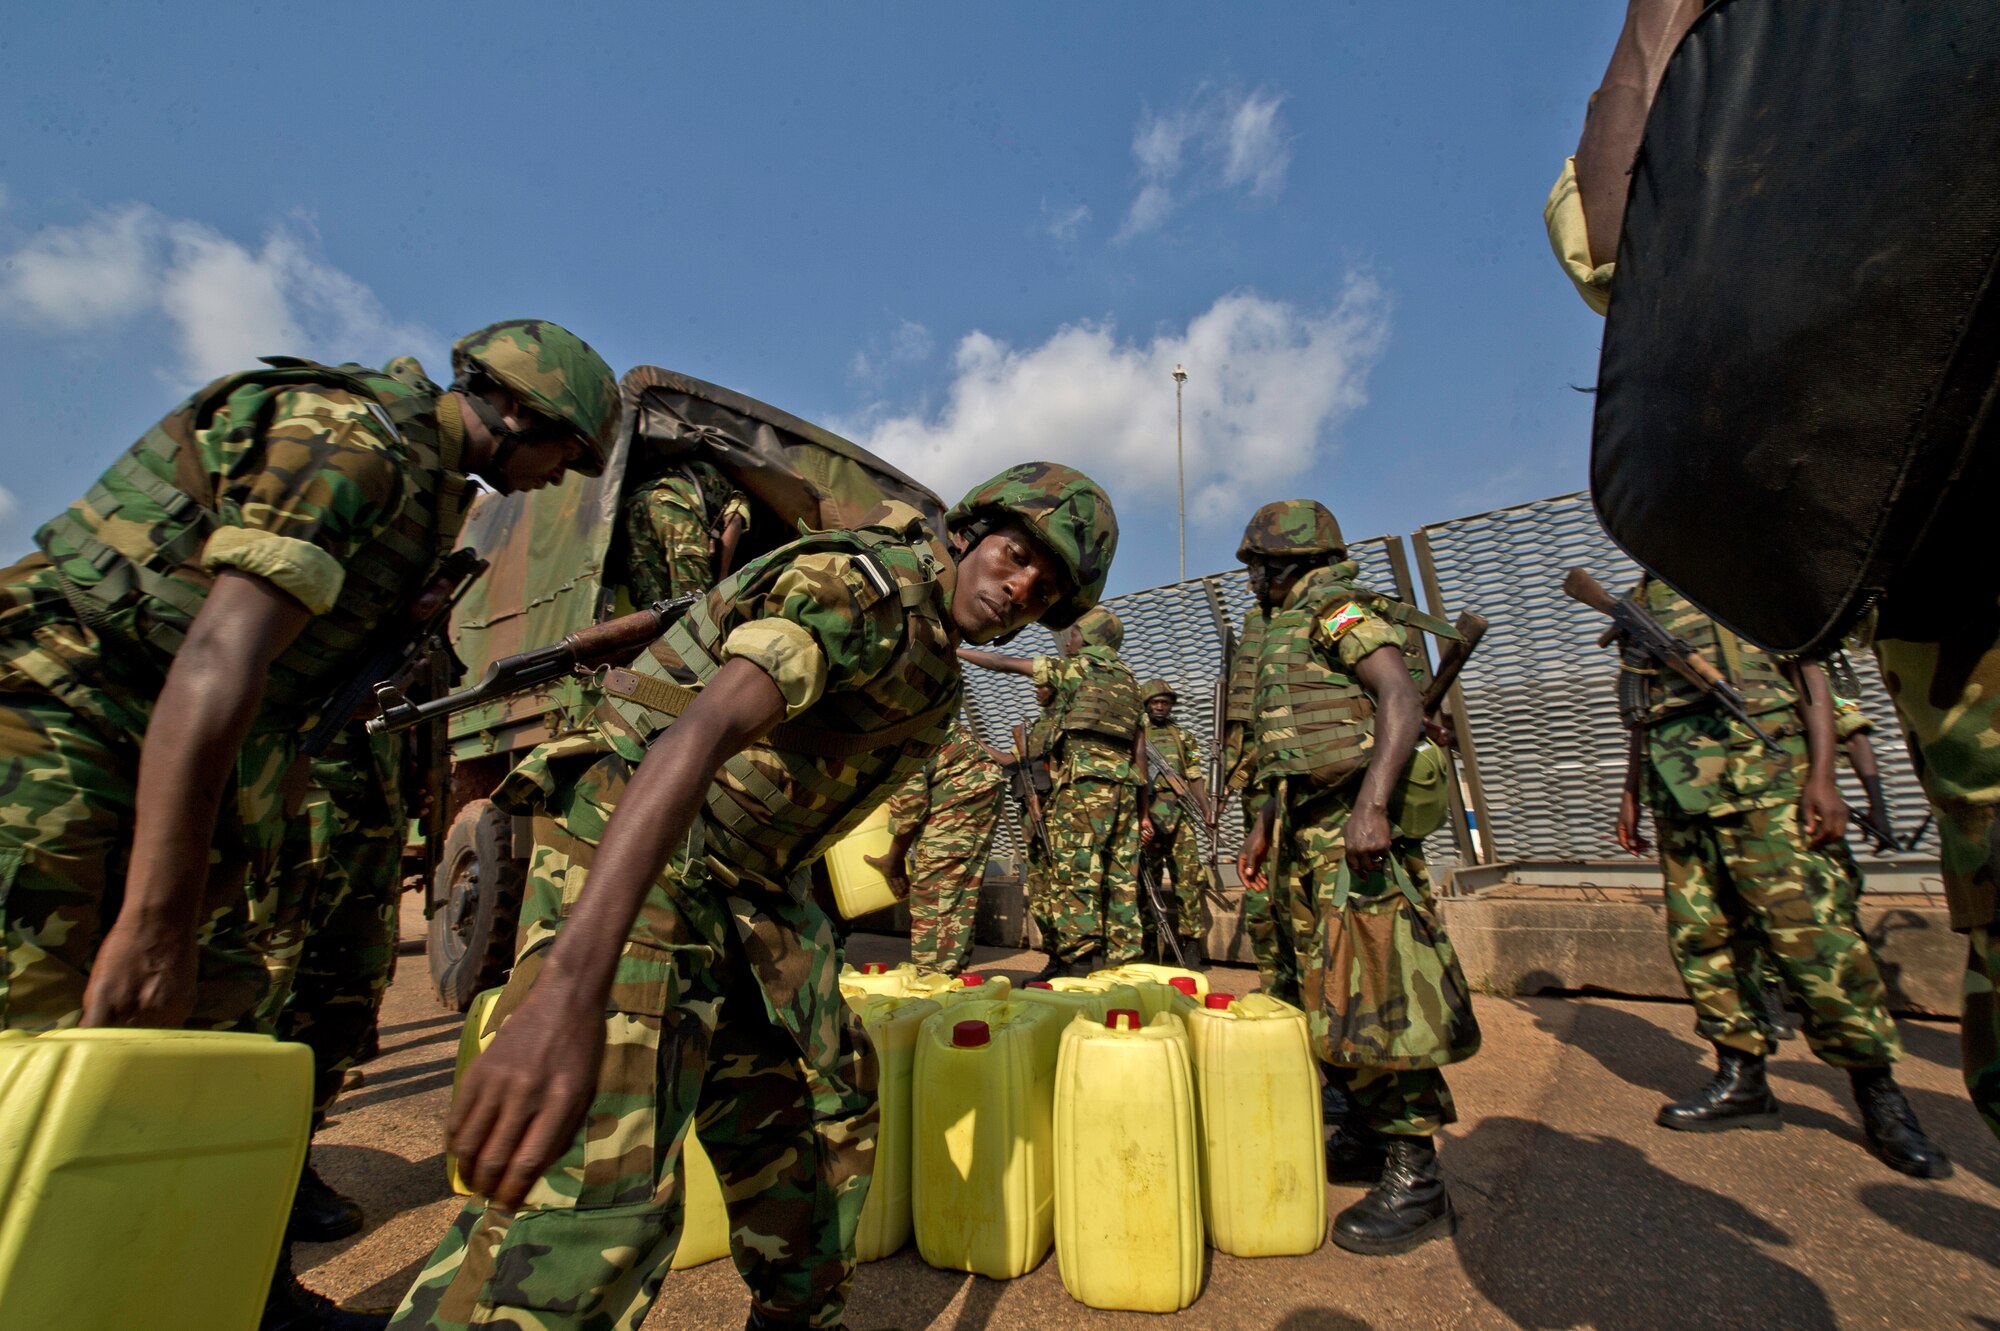 Burundi soldiers load their gear at the Bangui Airport, Central Africa Republic, Dec. 13, 2013. In coordination with the French military and African Union, the U.S. military provided airlift support to transport Burundi soldiers, food and supplies in the CAR. This support is aimed at enabling African forces to deploy promptly to prevent further spread of sectarian violence and restore security in CAR. (U.S. Air Force photo/Staff Sgt. Erik Cardenas)